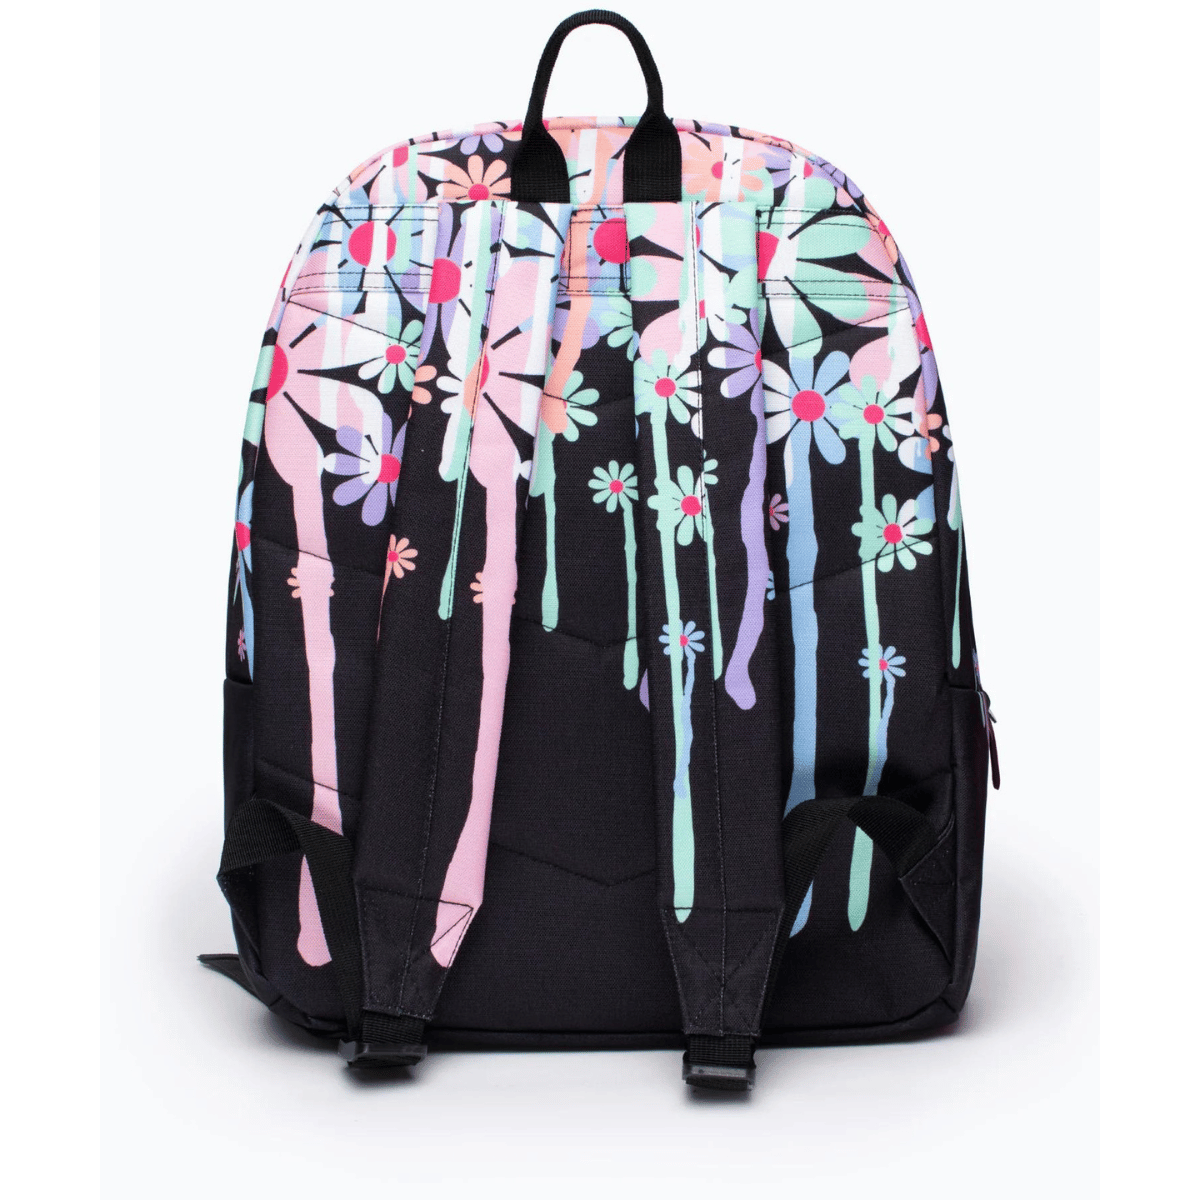 Hype rucksack with floral daisy design back view